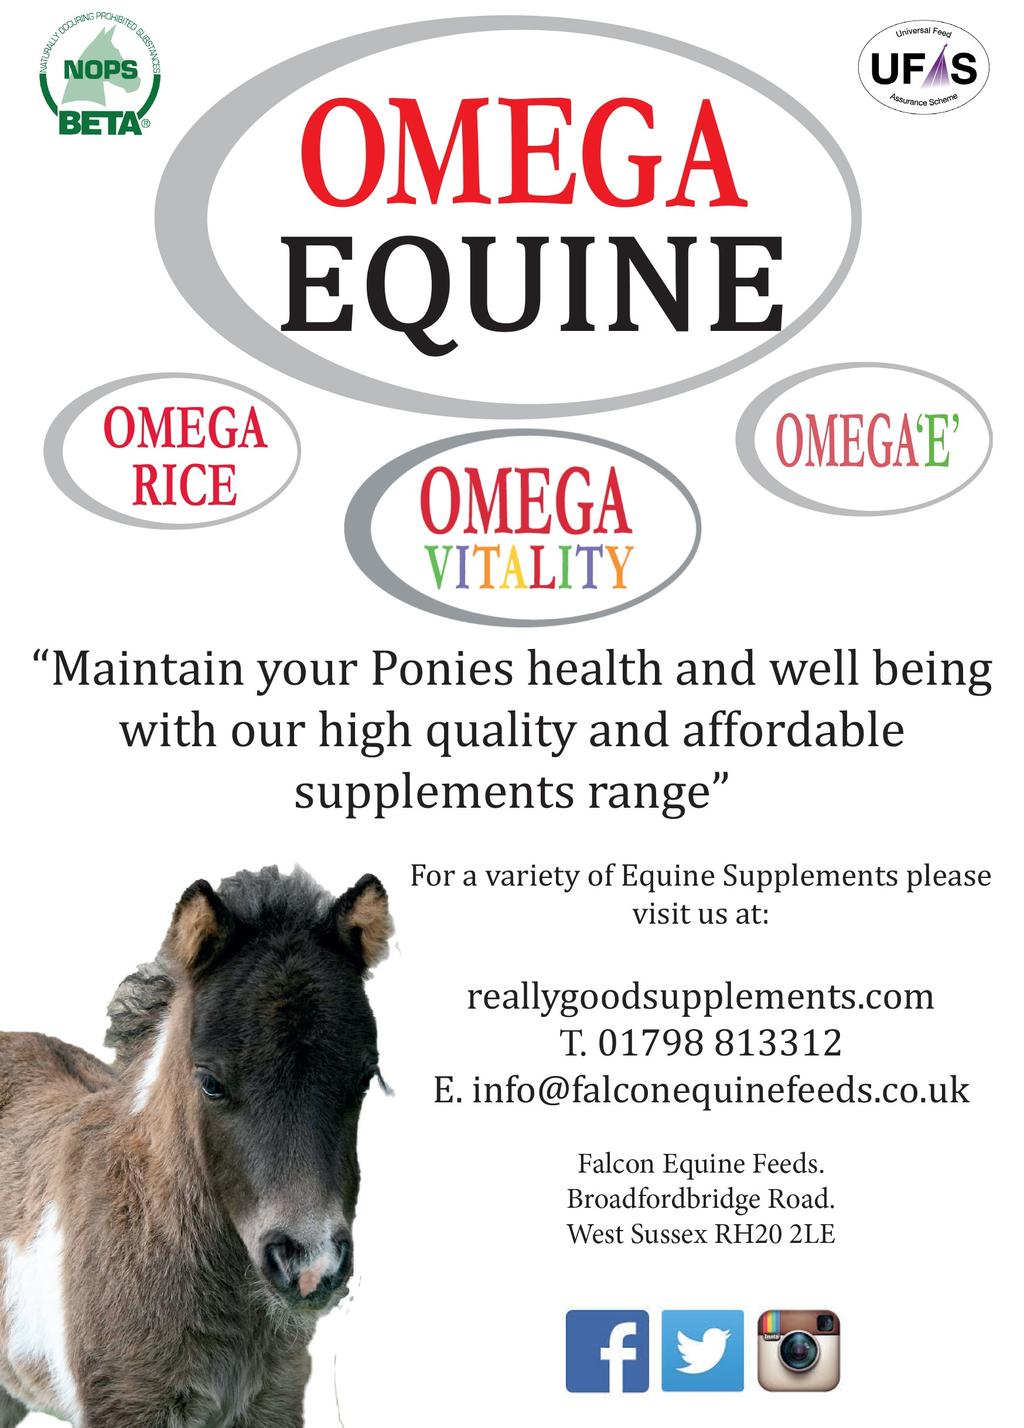 Many thanks to Omega Equine for sponsoring our